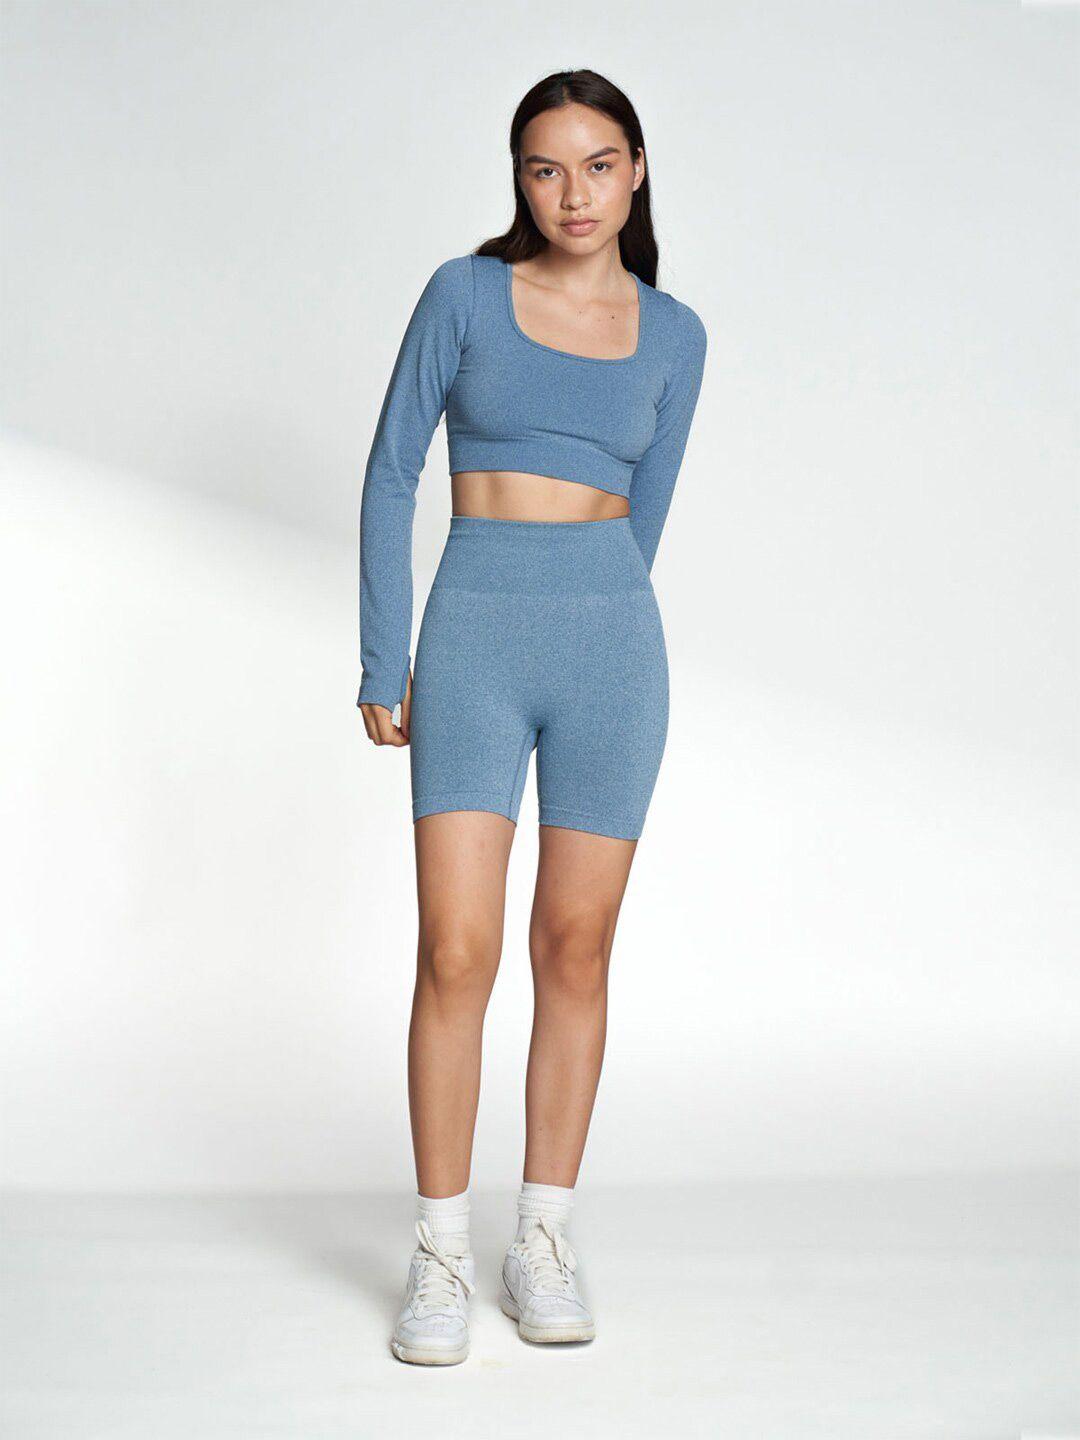 koovs square neck long sleeves fitted sports crop top